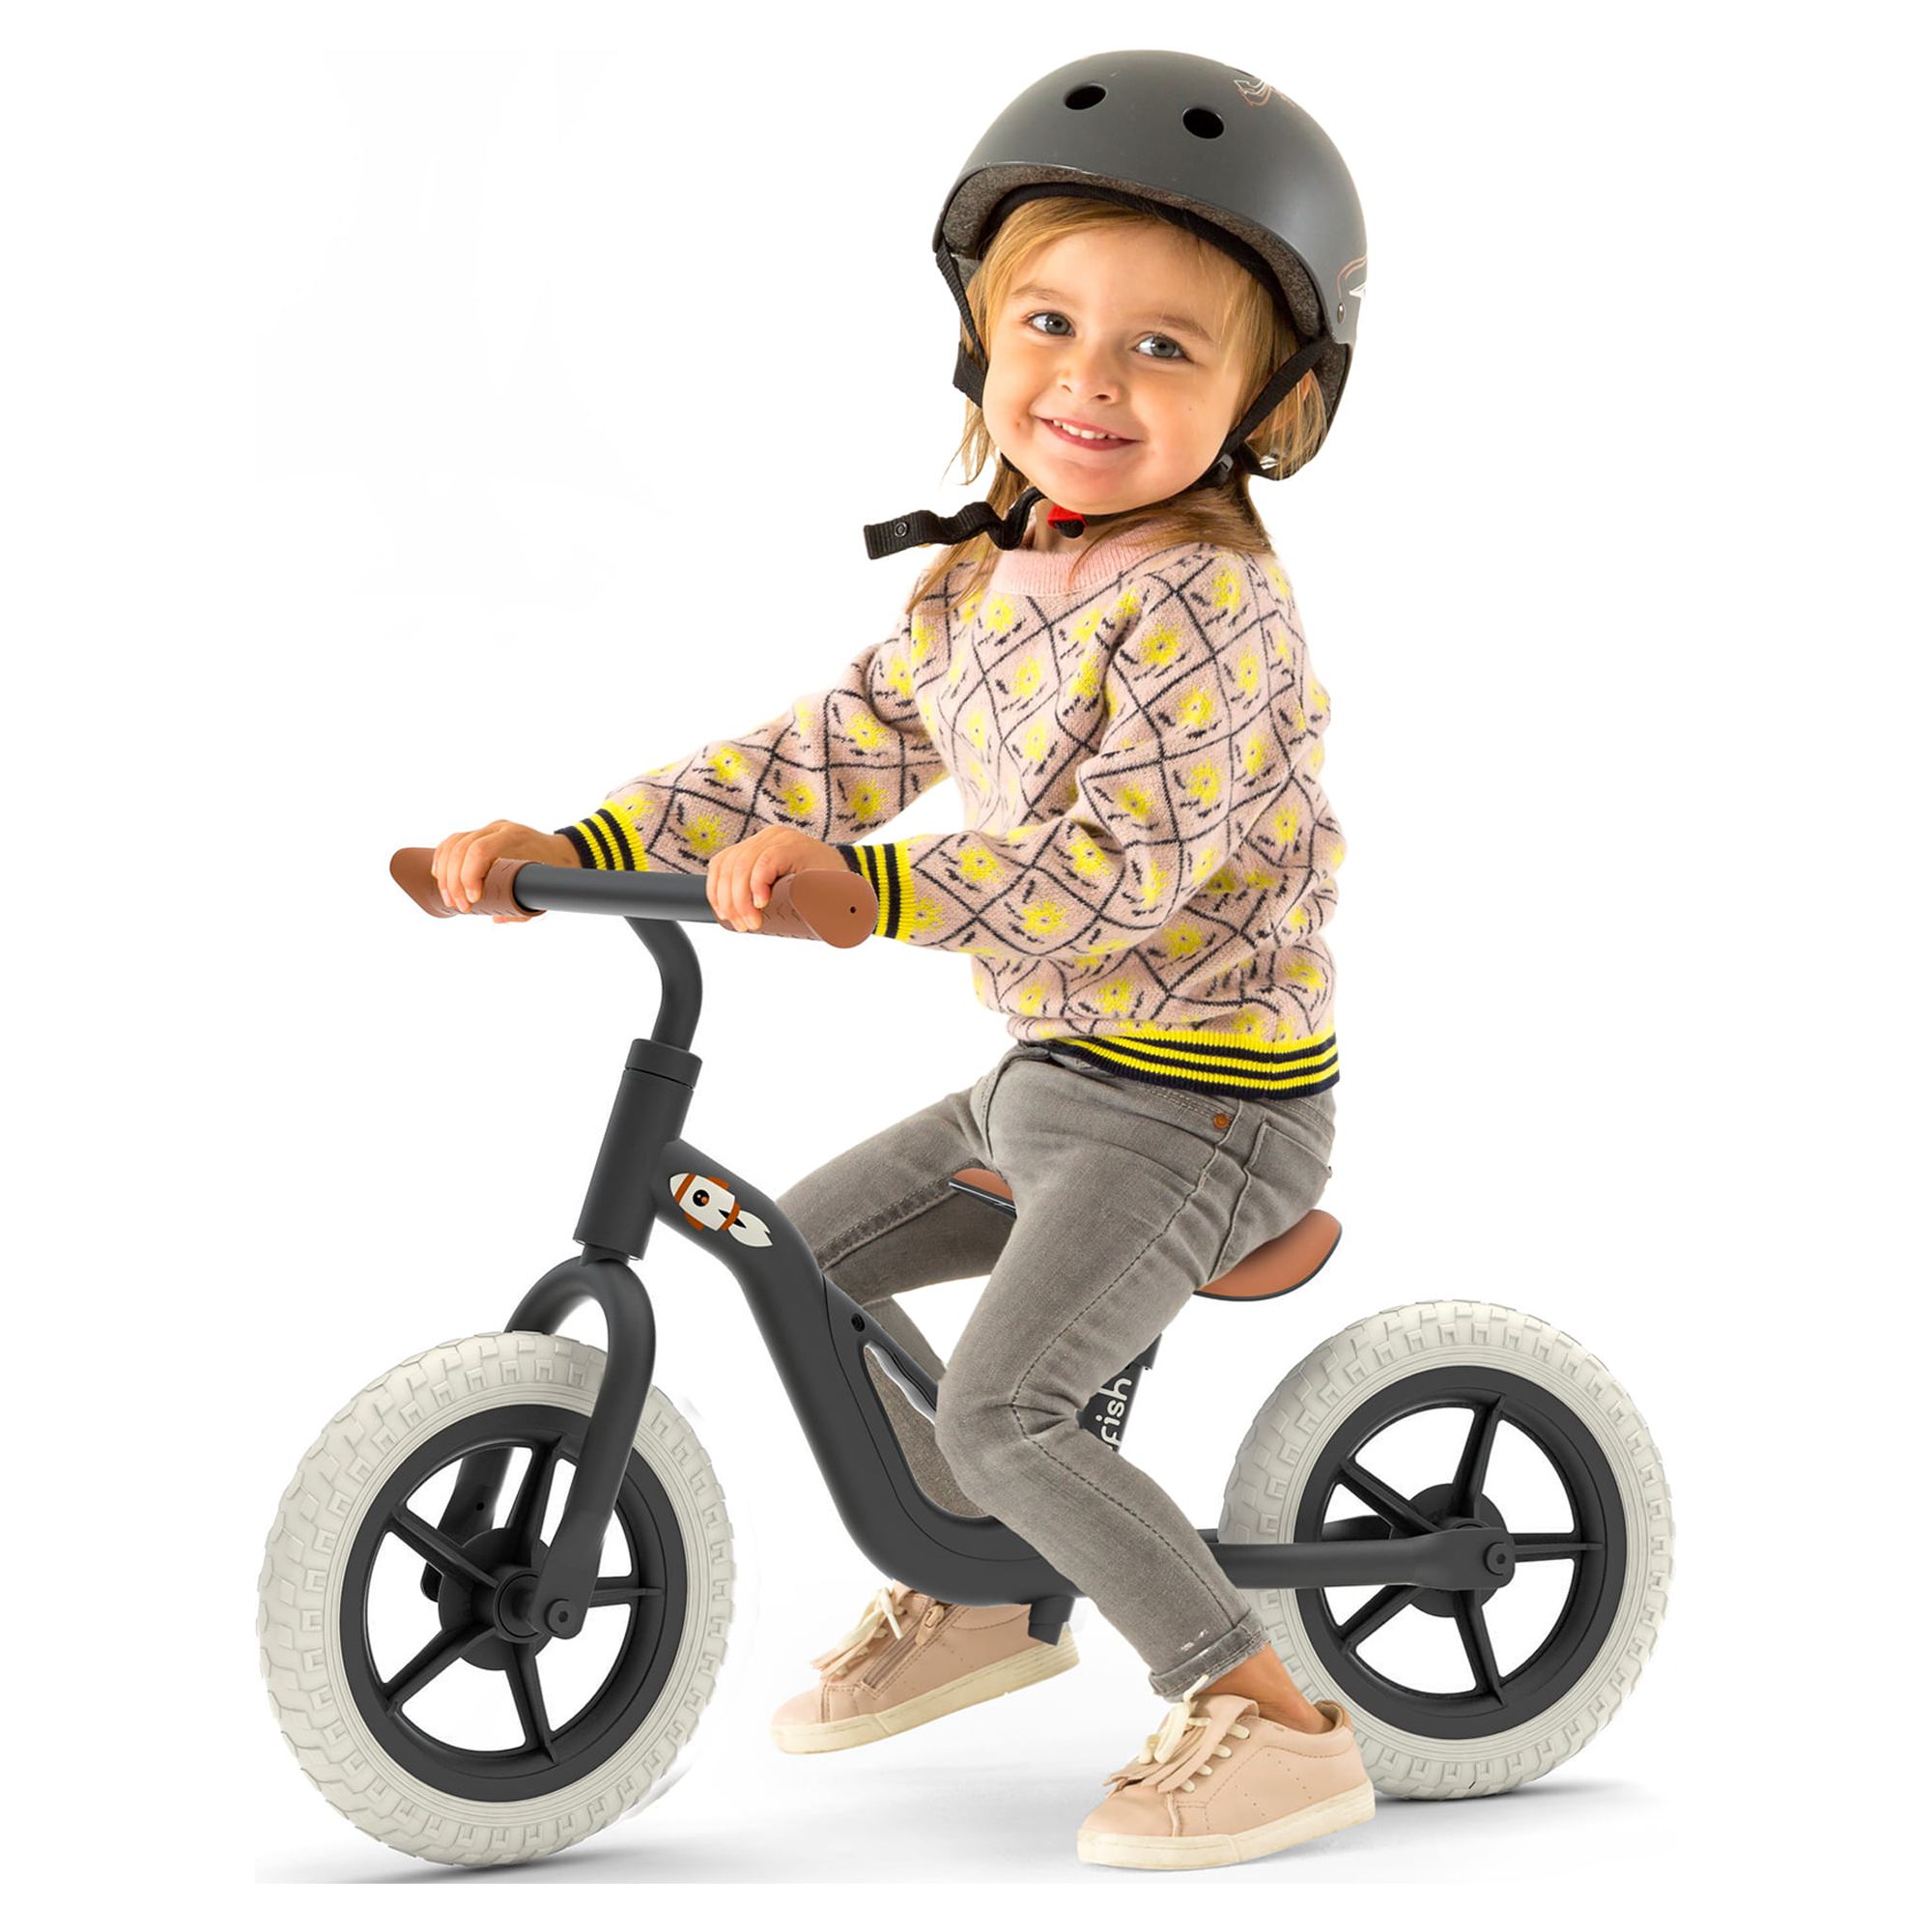 Chillafish Charlie lightweight toddler balance bike with carry handle, adjustable seat and handlebar, puncture-proof 10-inch wheels, for kids 18-48 months, Black - image 3 of 11